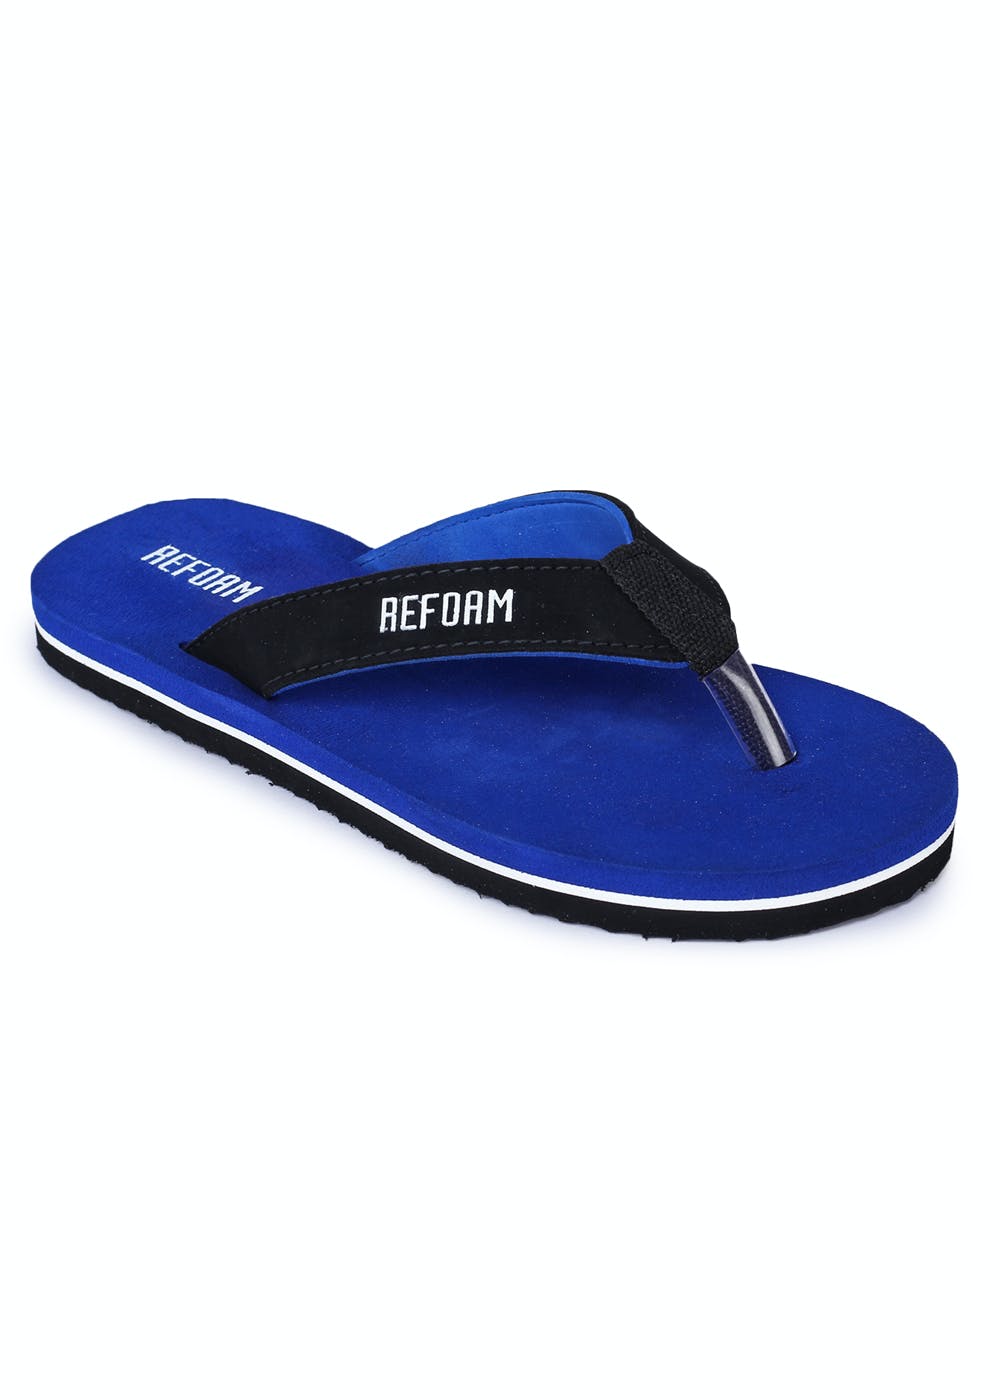 Shop For The Best Local Brands In Flip Flops  Slippers Online  LBB